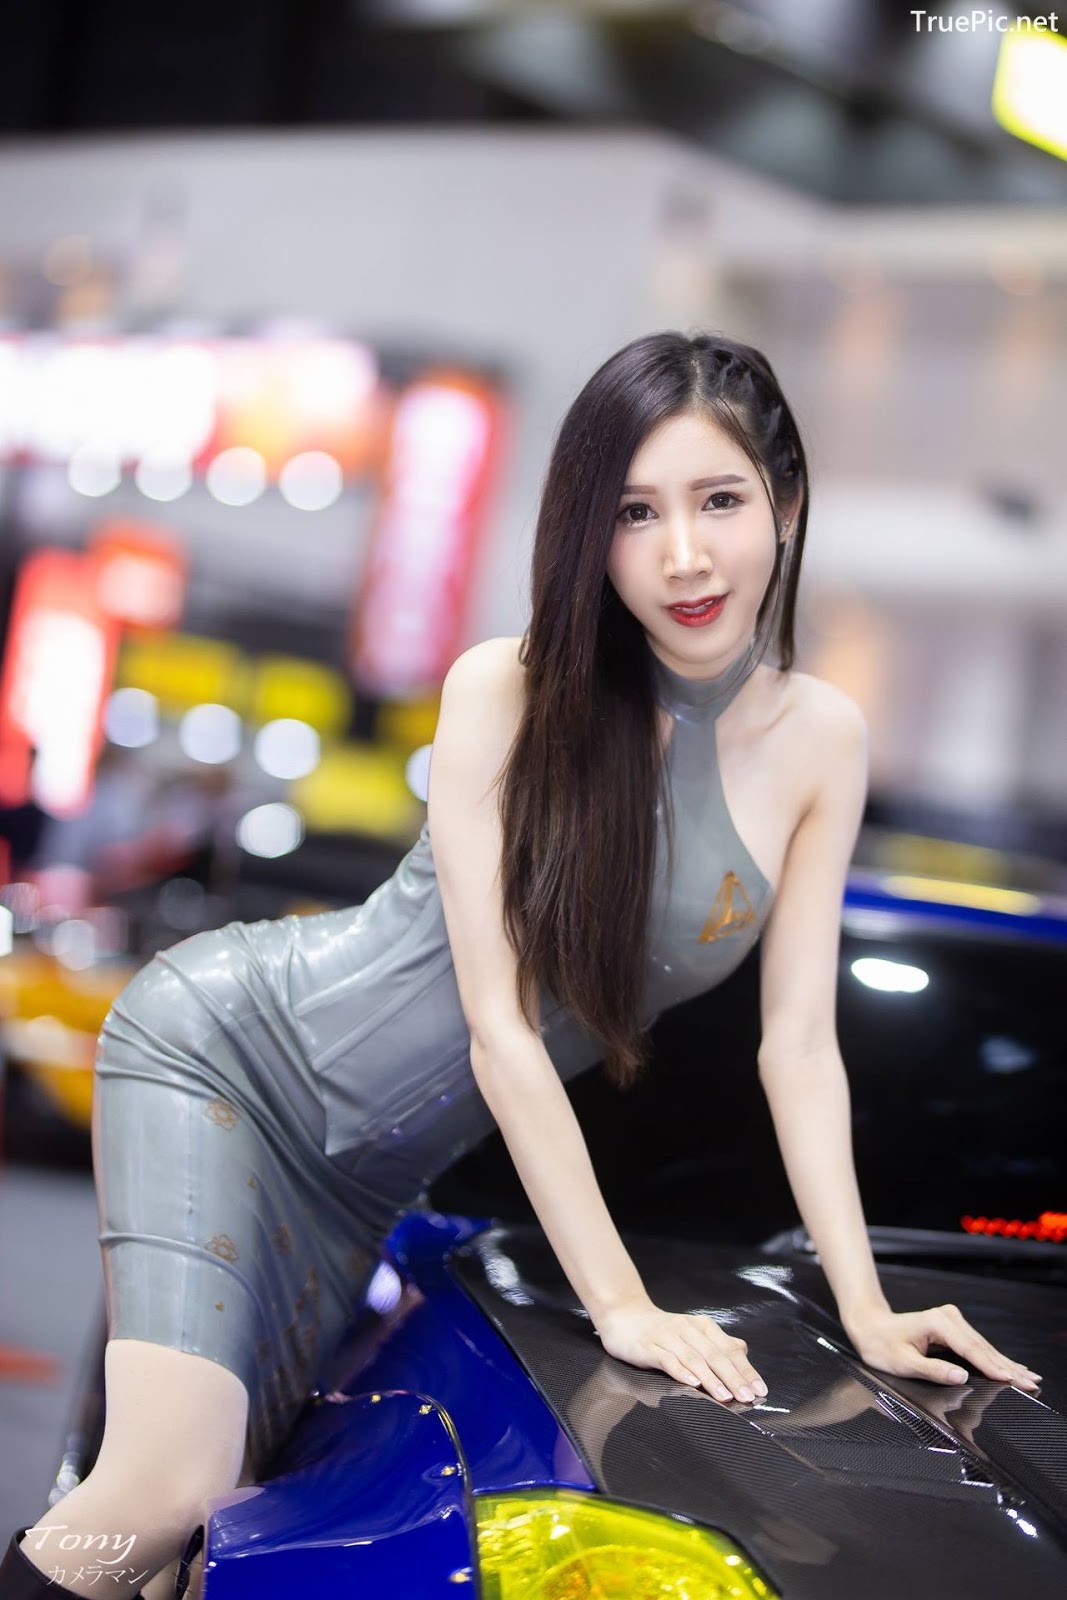 Image-Thailand-Hot-Model-Thai-Racing-Girl-At-Motor-Expo-2018-TruePic.net- Picture-79